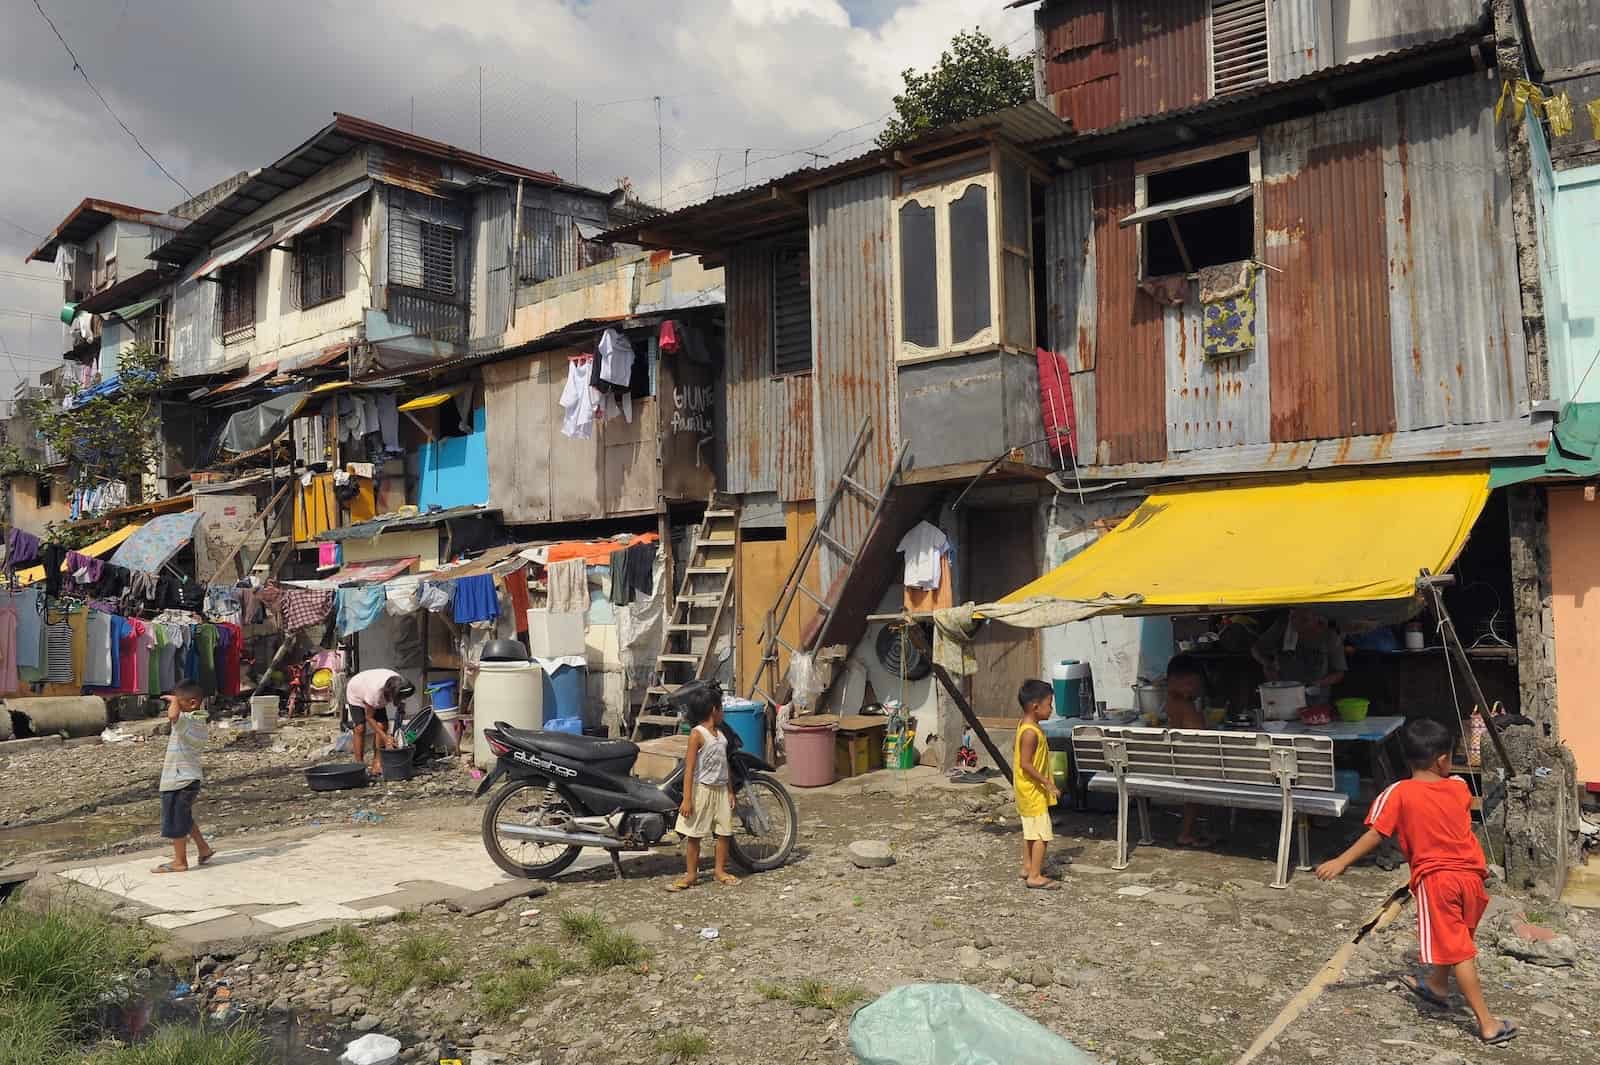 A row of makeshift homes on a street, several stories high, made from metal sheets and wood, showing poverty in Asia.